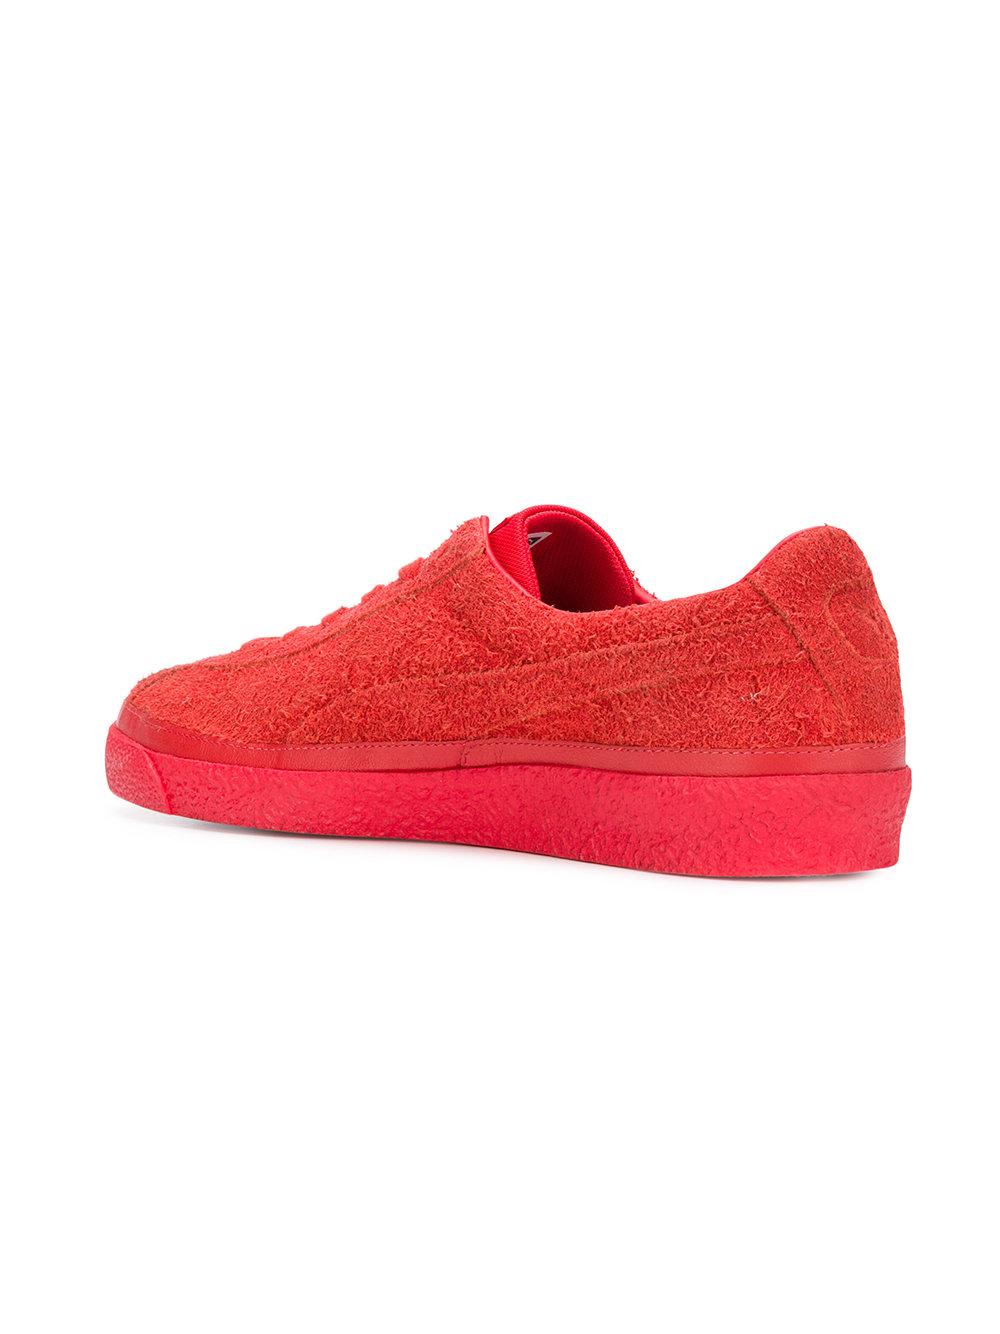 PUMA Leather Aytao Sneakers in Red for Men - Lyst